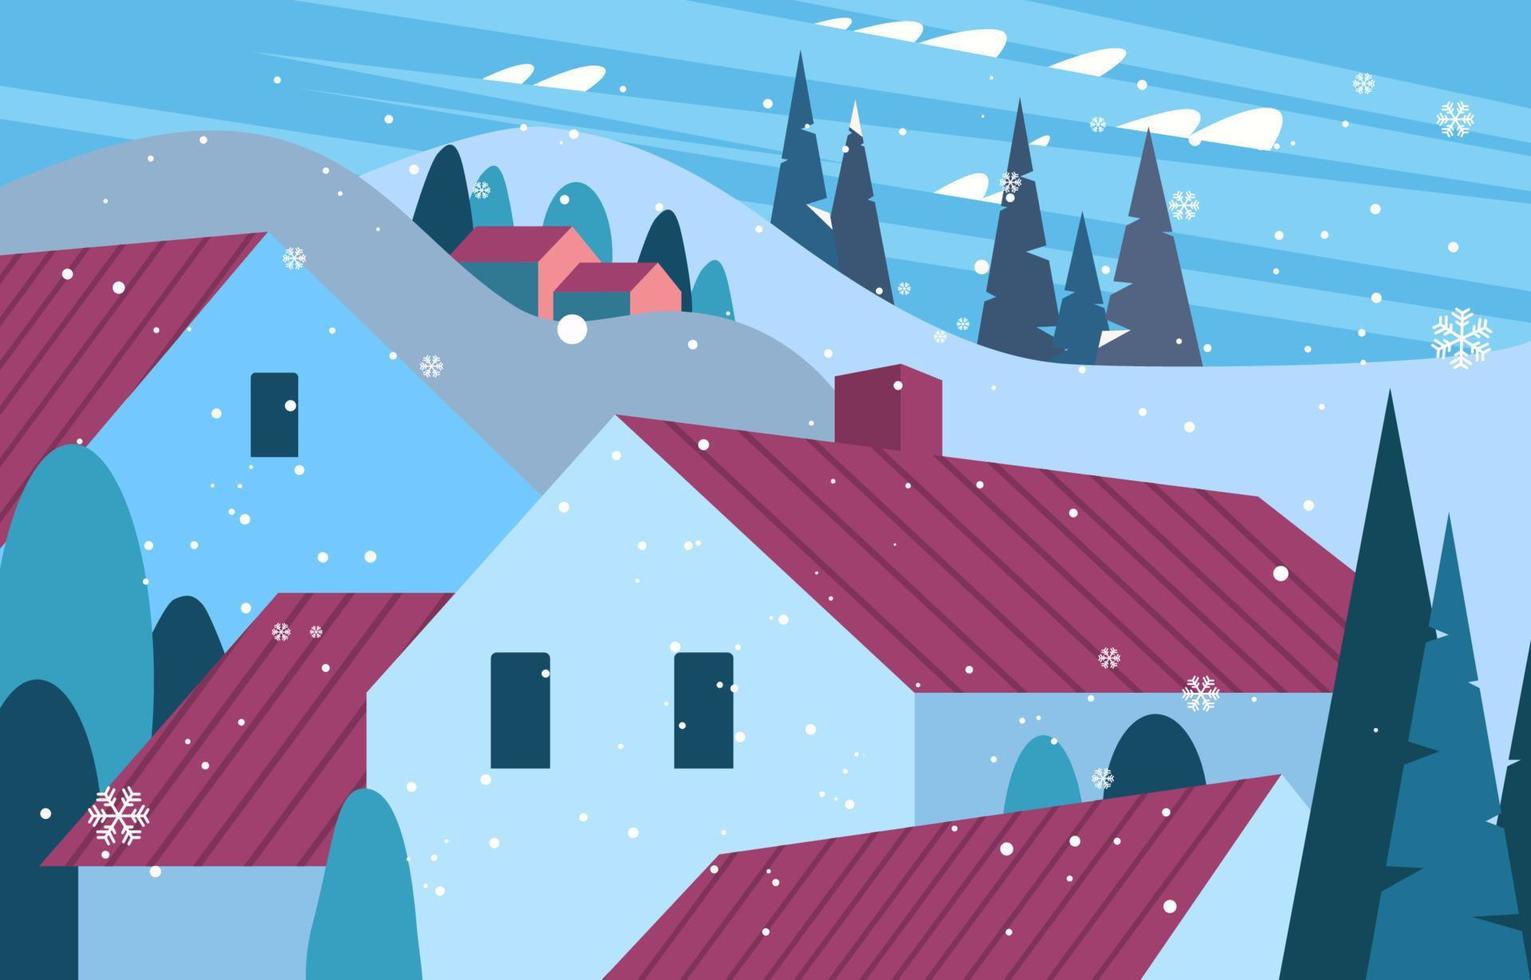 Houses on Snowy Hill Background vector